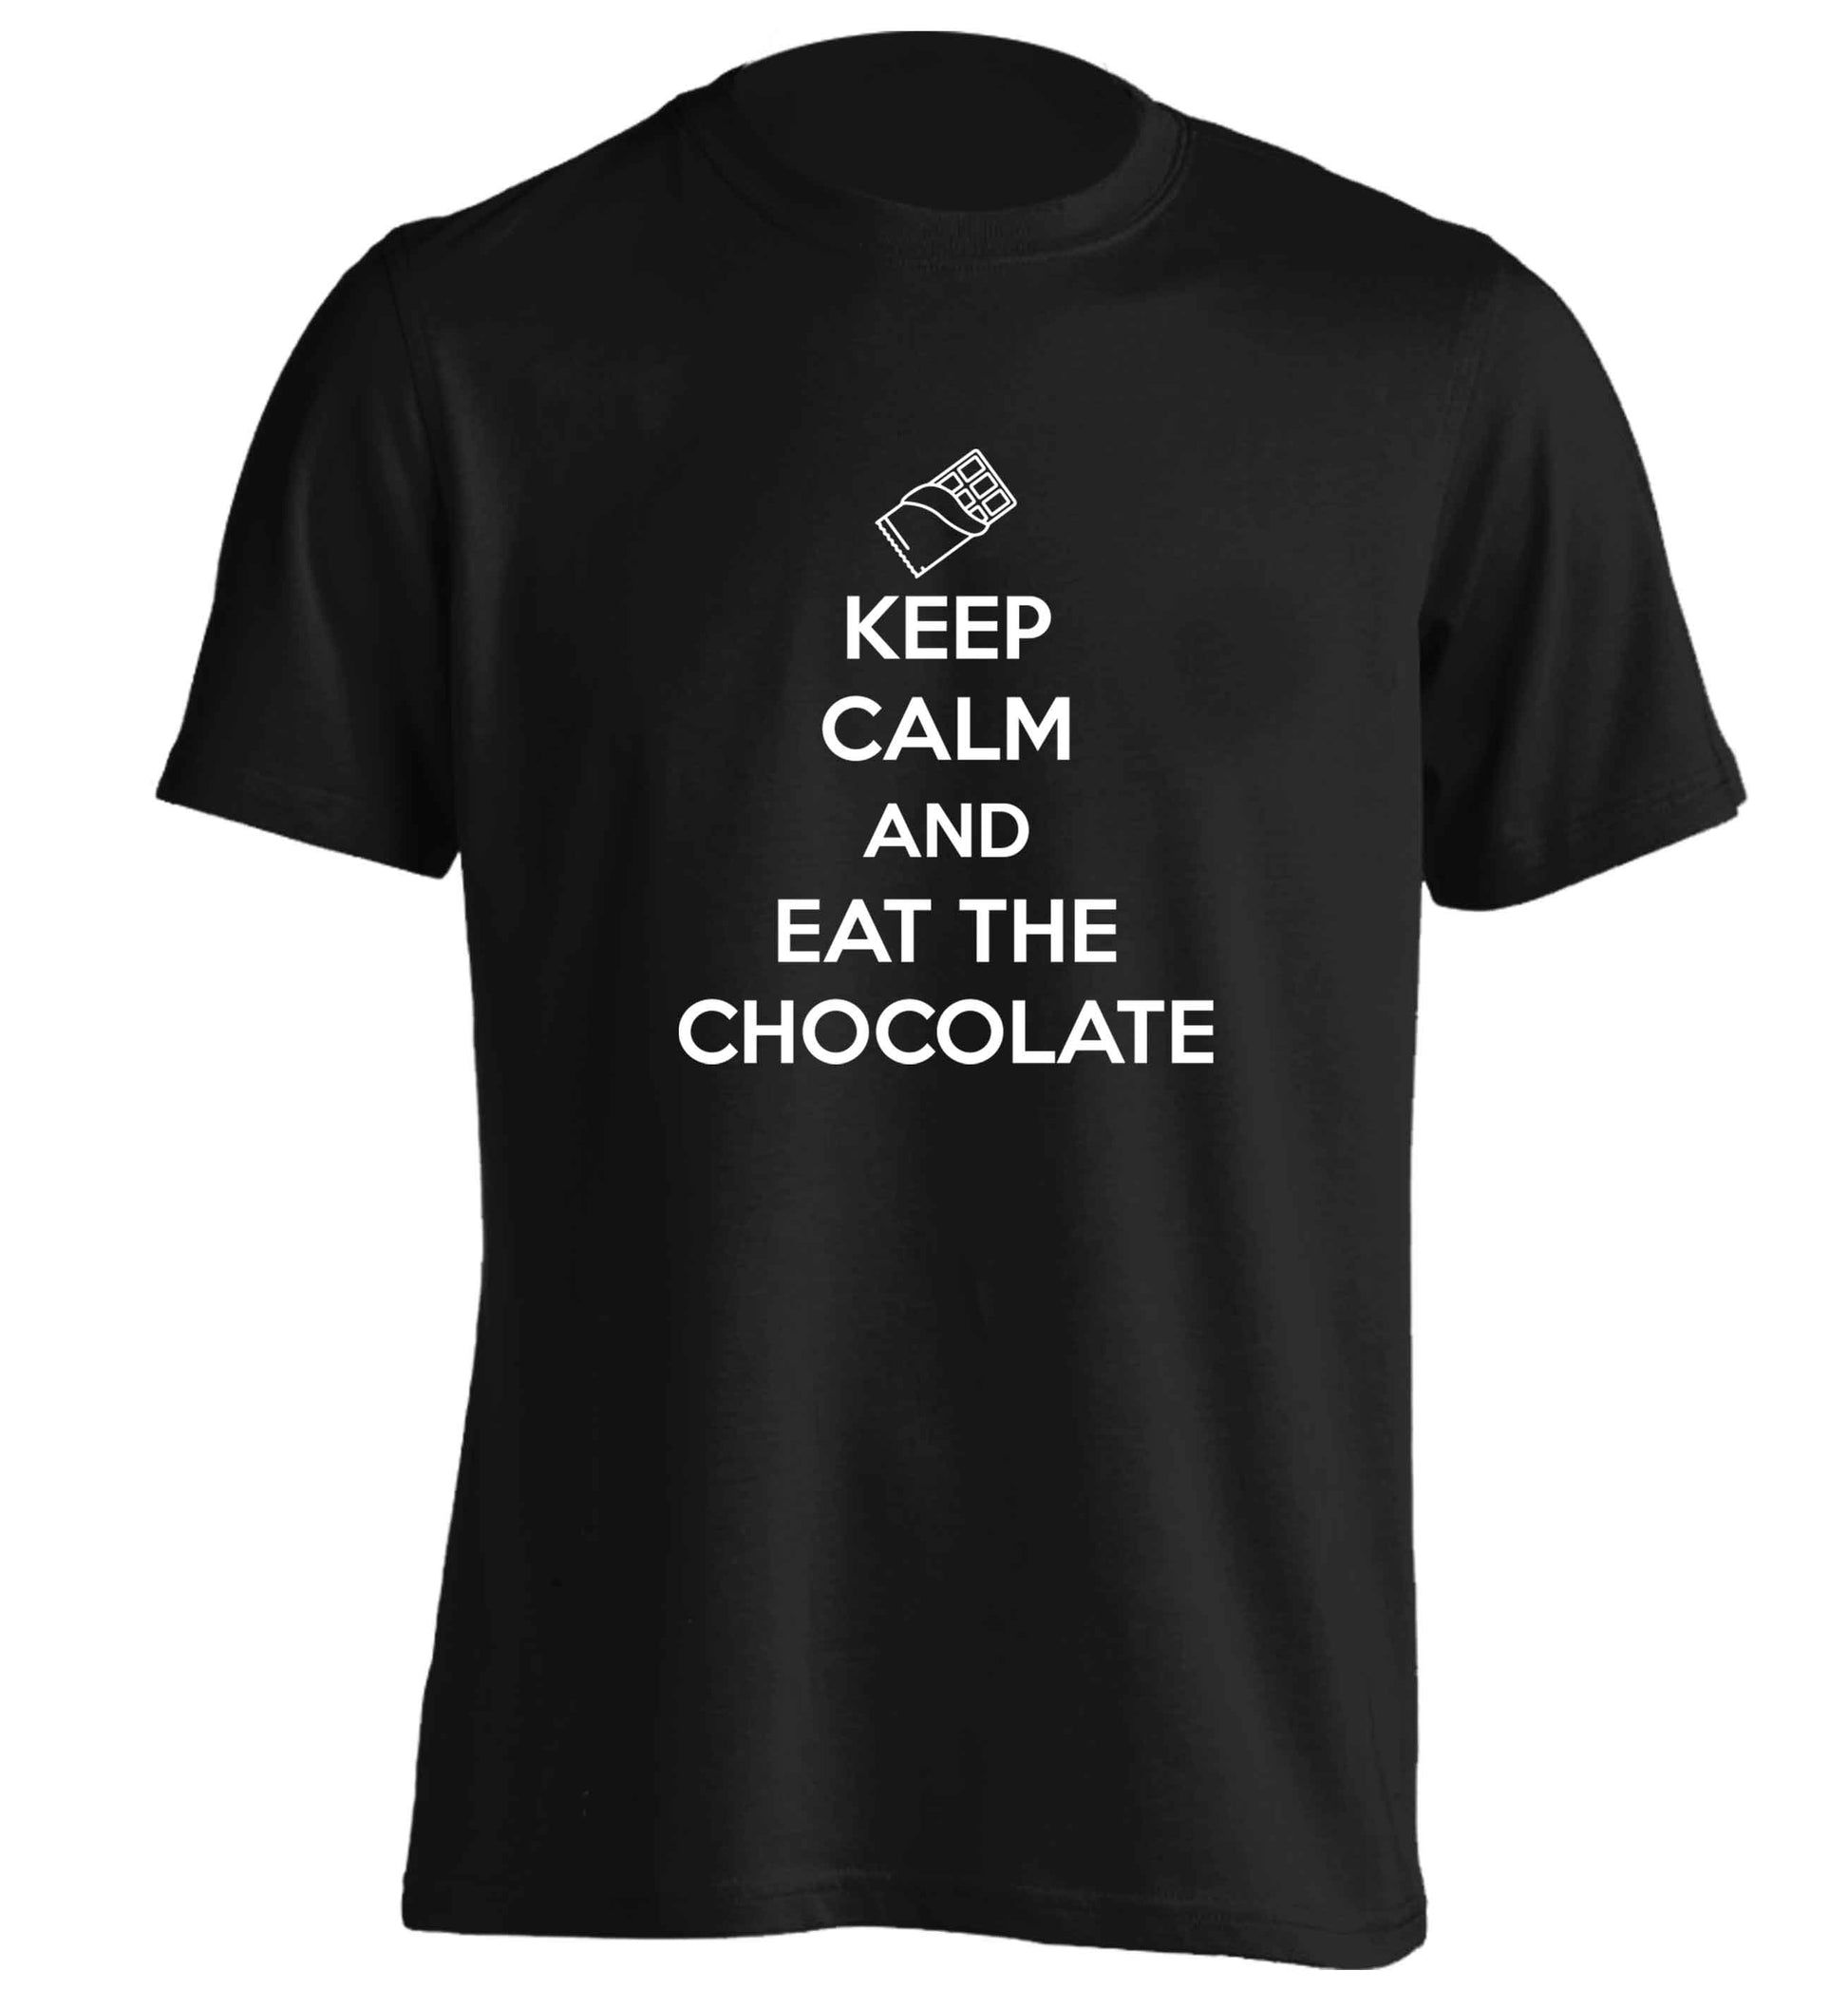 funny gift for a chocaholic! Keep calm and eat the chocolate adults unisex black Tshirt 2XL